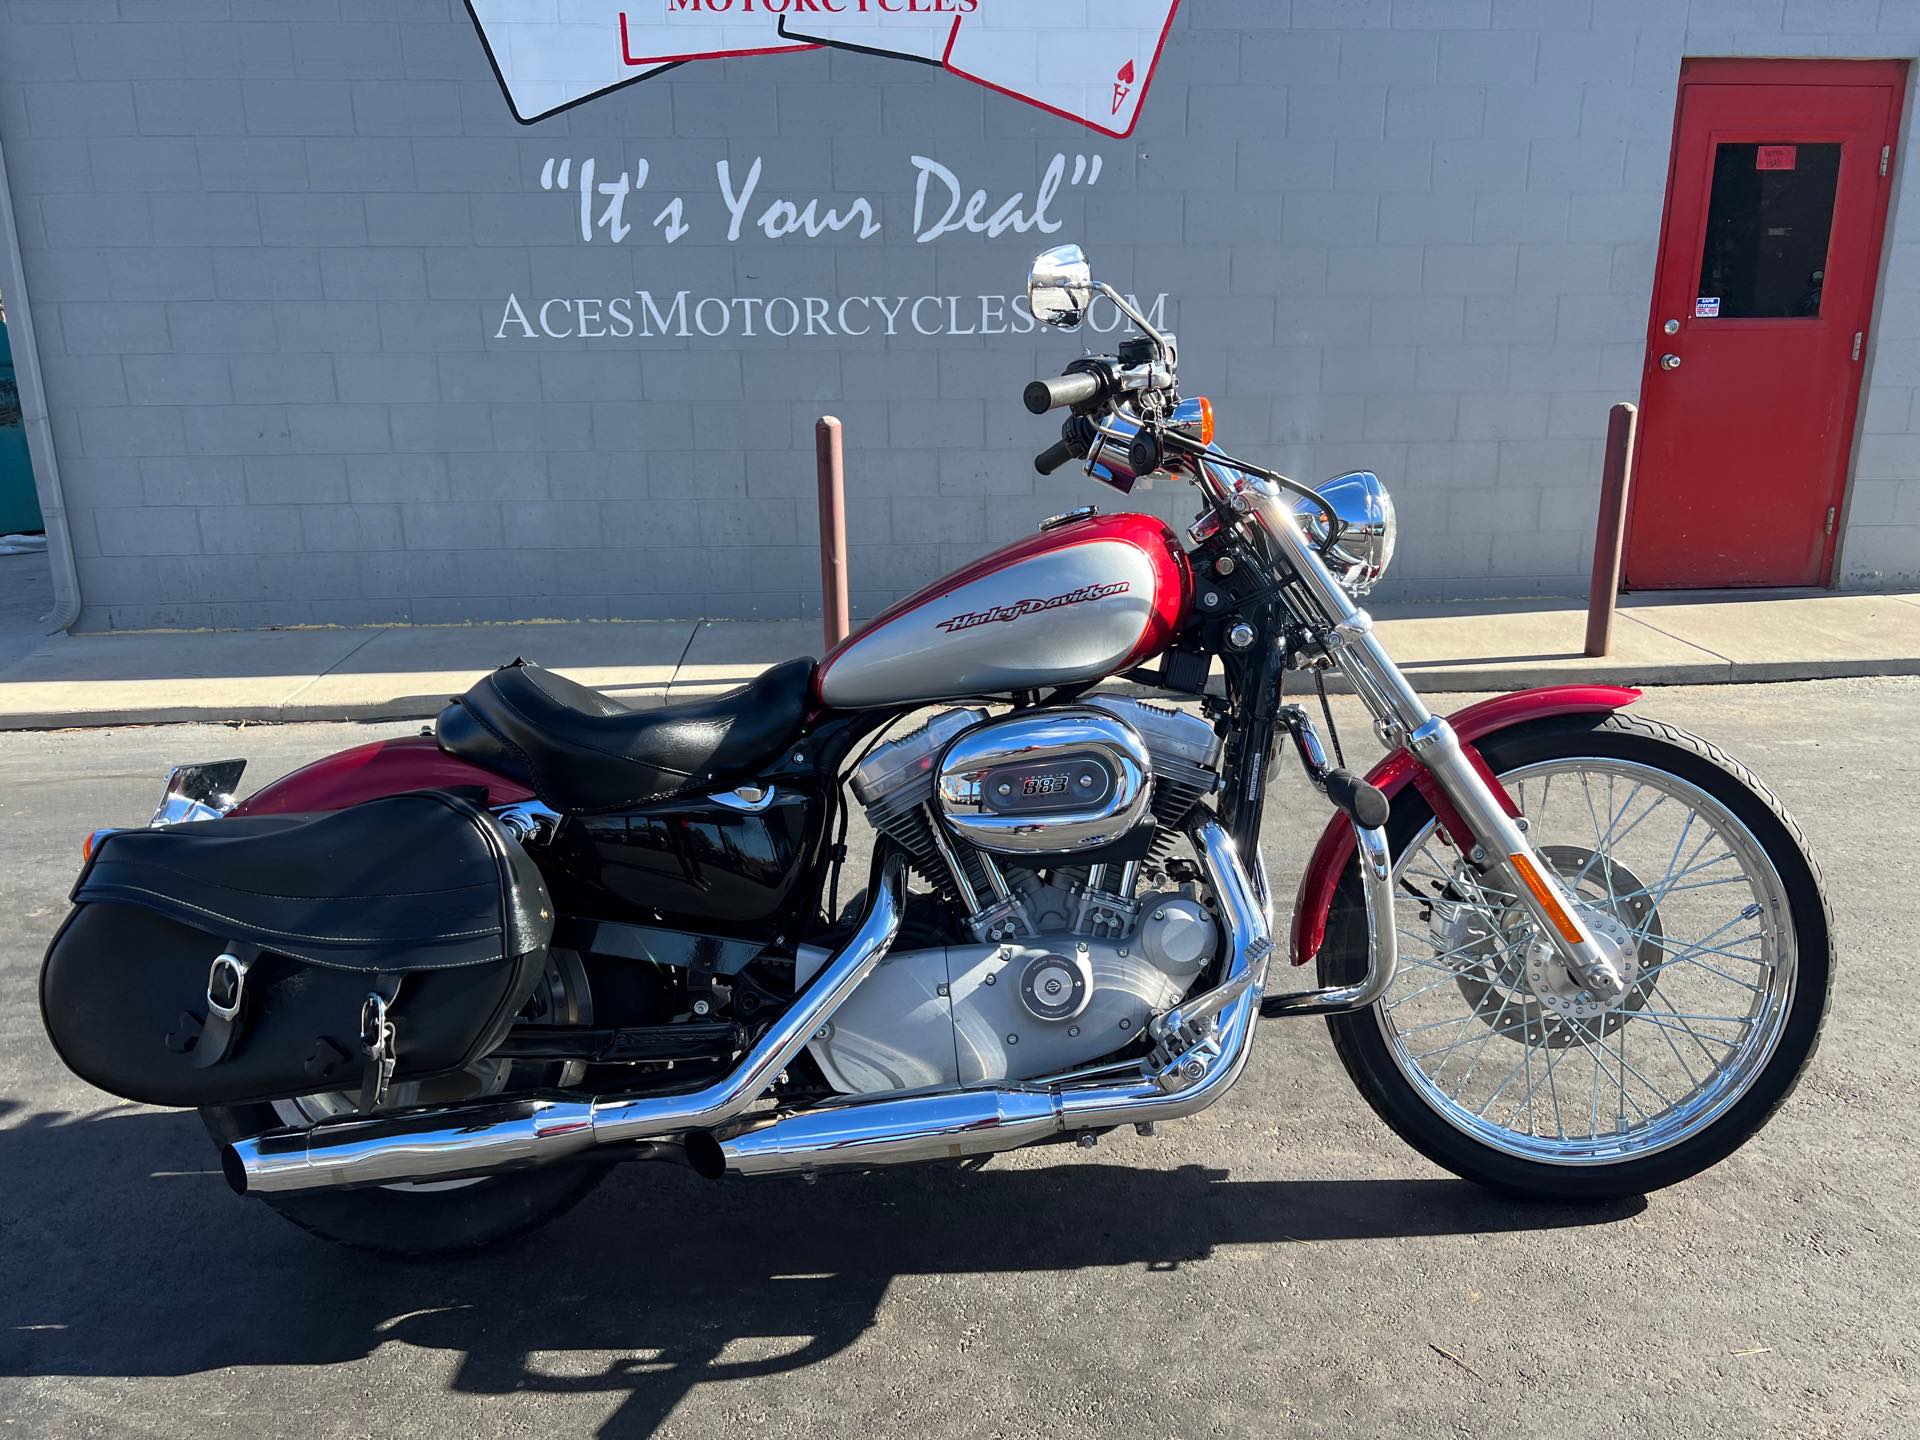 2004 Harley-Davidson Sportster 883 Custom at Aces Motorcycles - Fort Collins